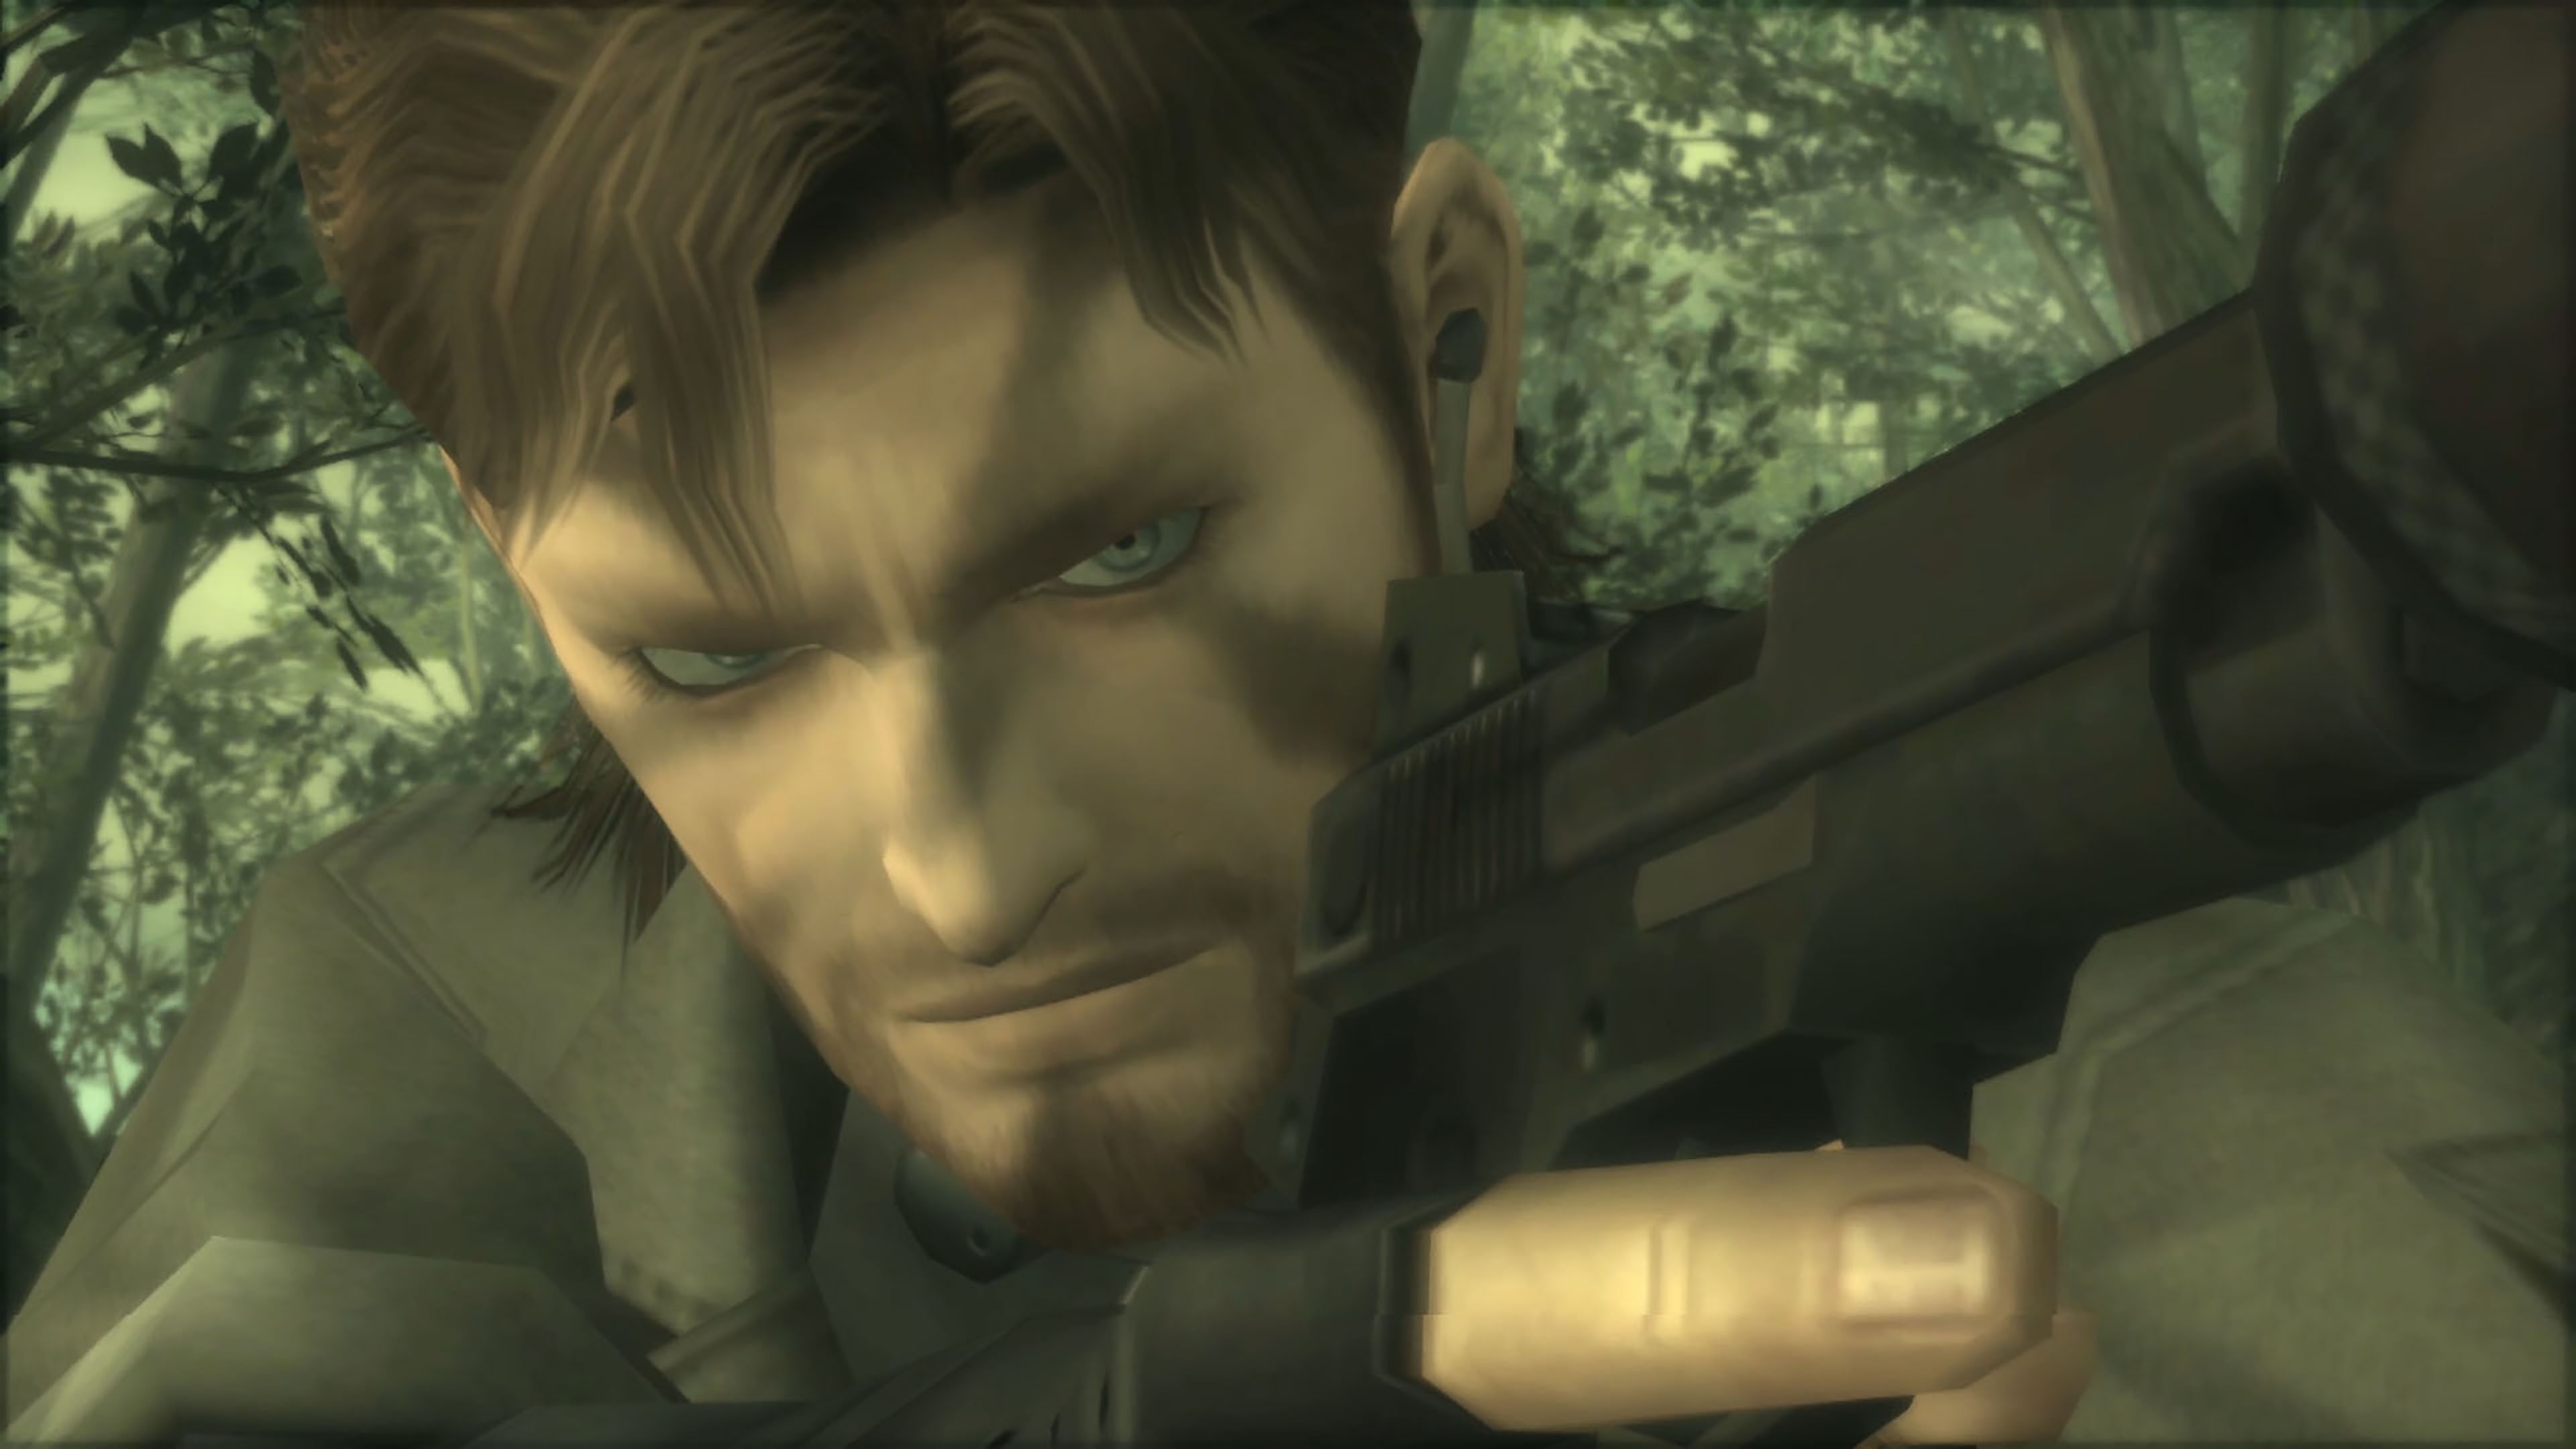 Metal Gear Solid Devs Describe some Content as Outdated and Potentially Offensive